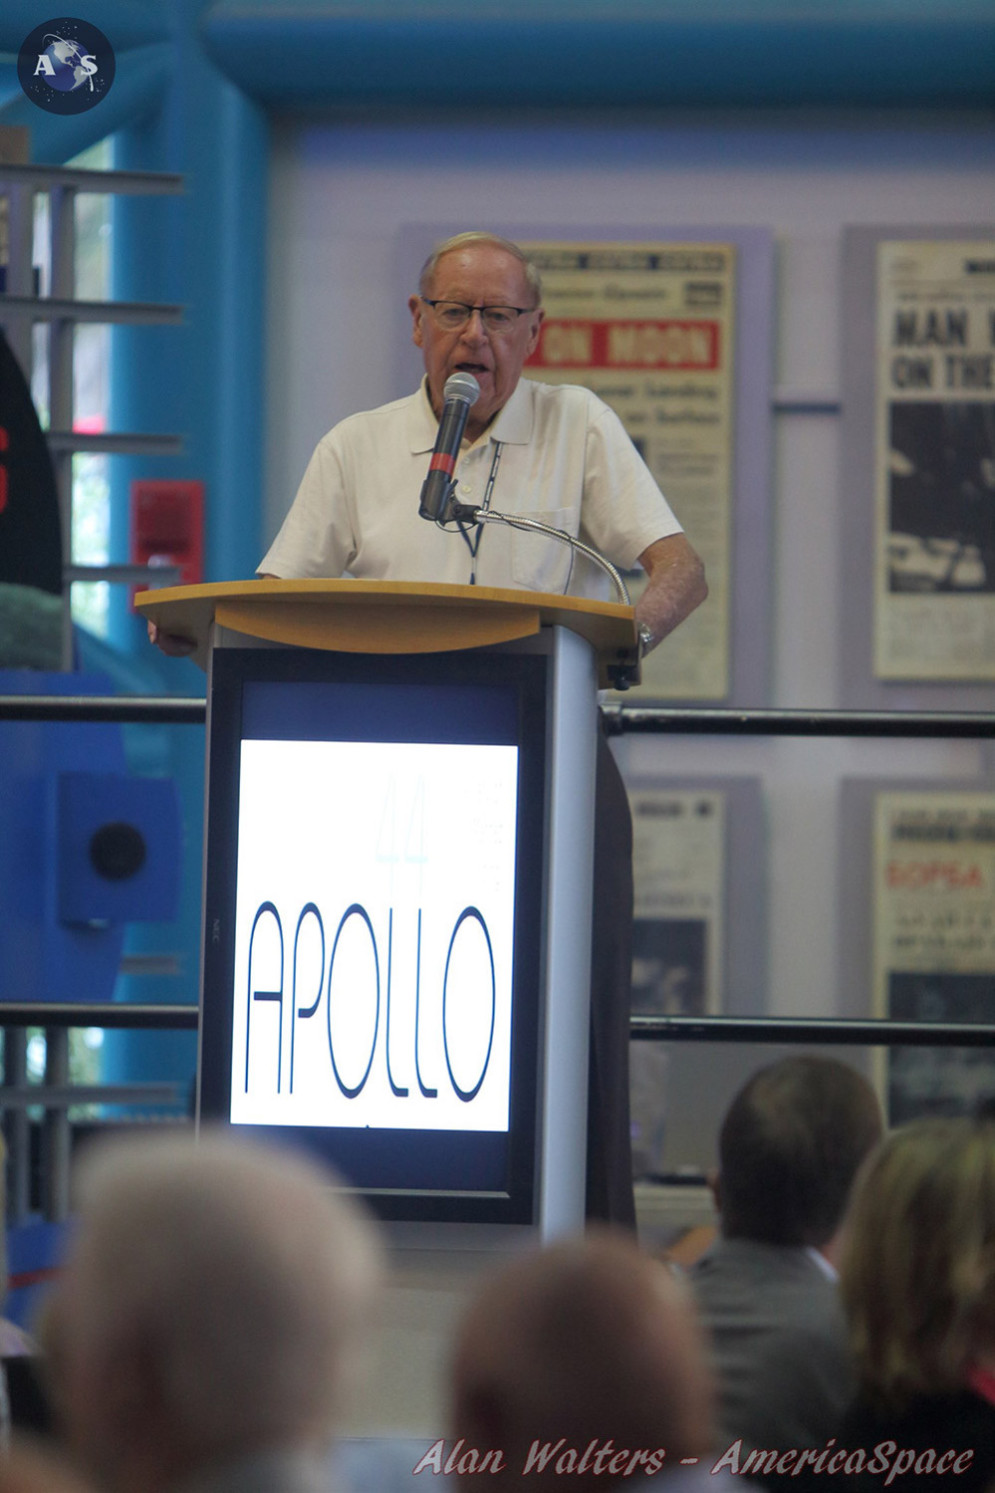 Jack King speaks about the Apollo program to a group at the Saturn V Center located at Kennedy Space Center in Florida. Credit: Alan Walters